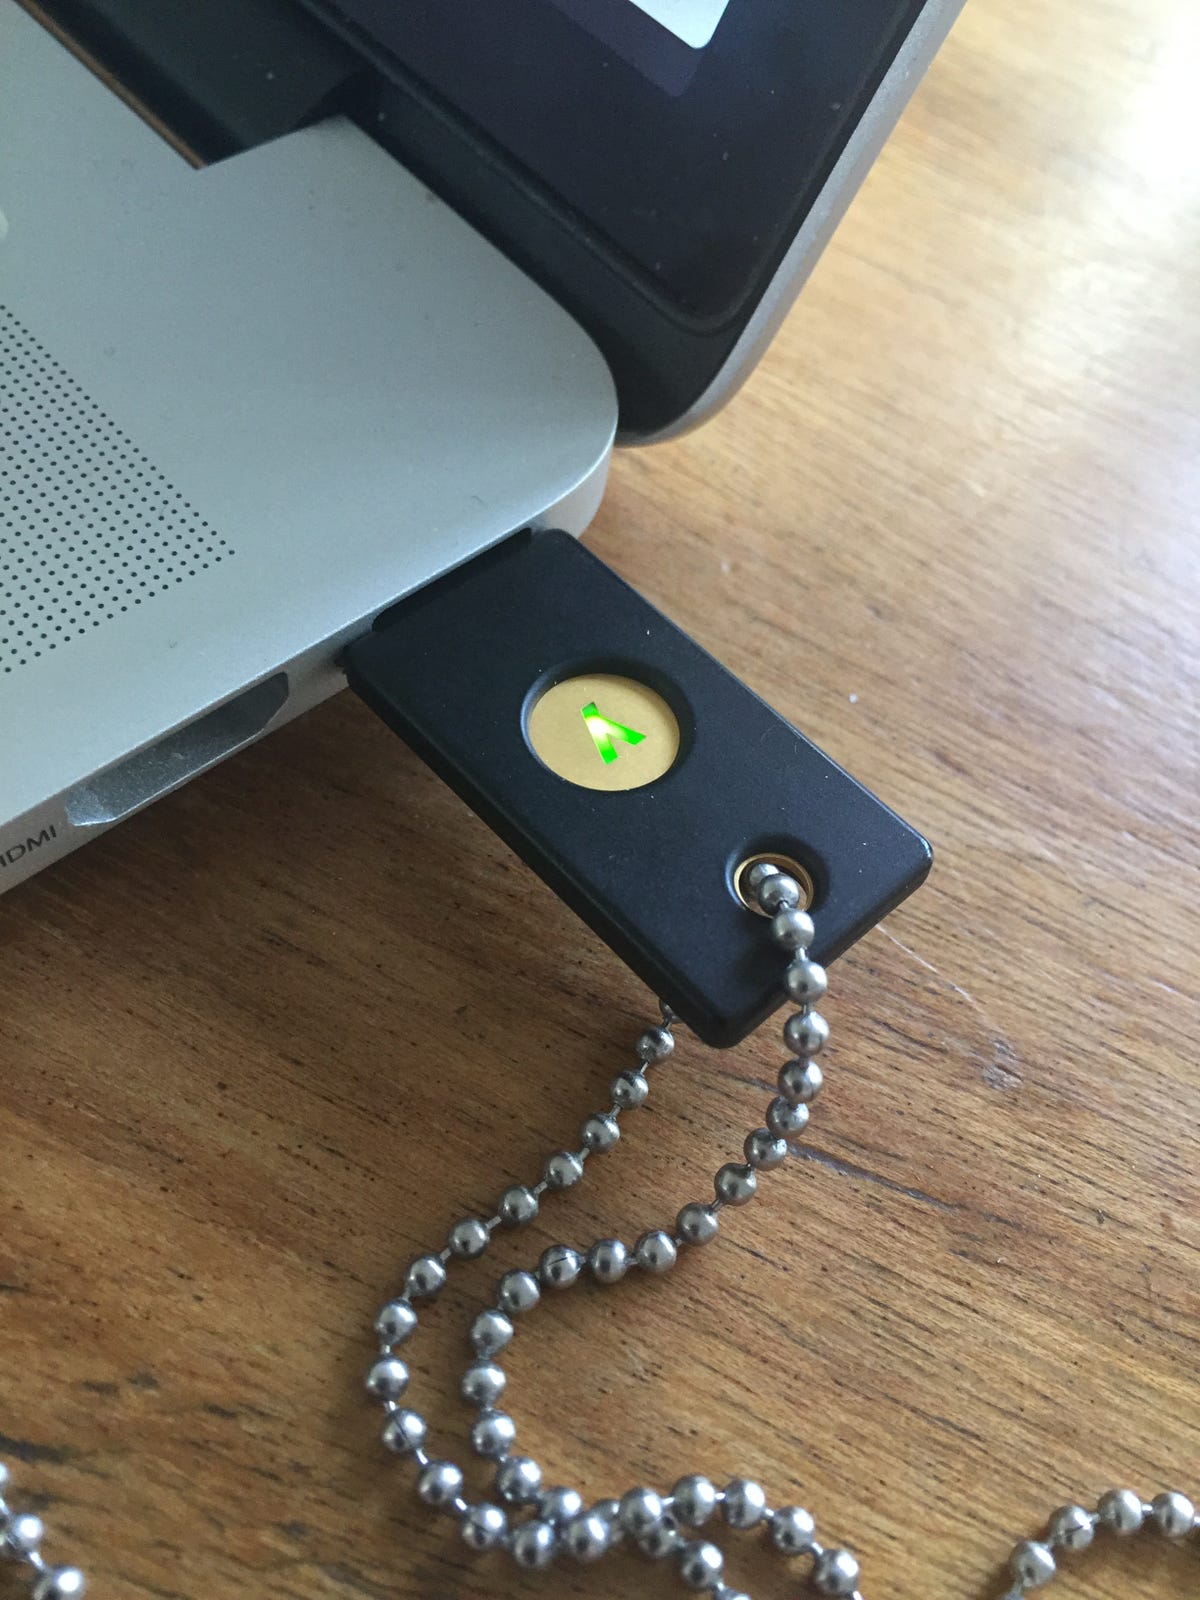 YubiKey 4 connected to MacBook